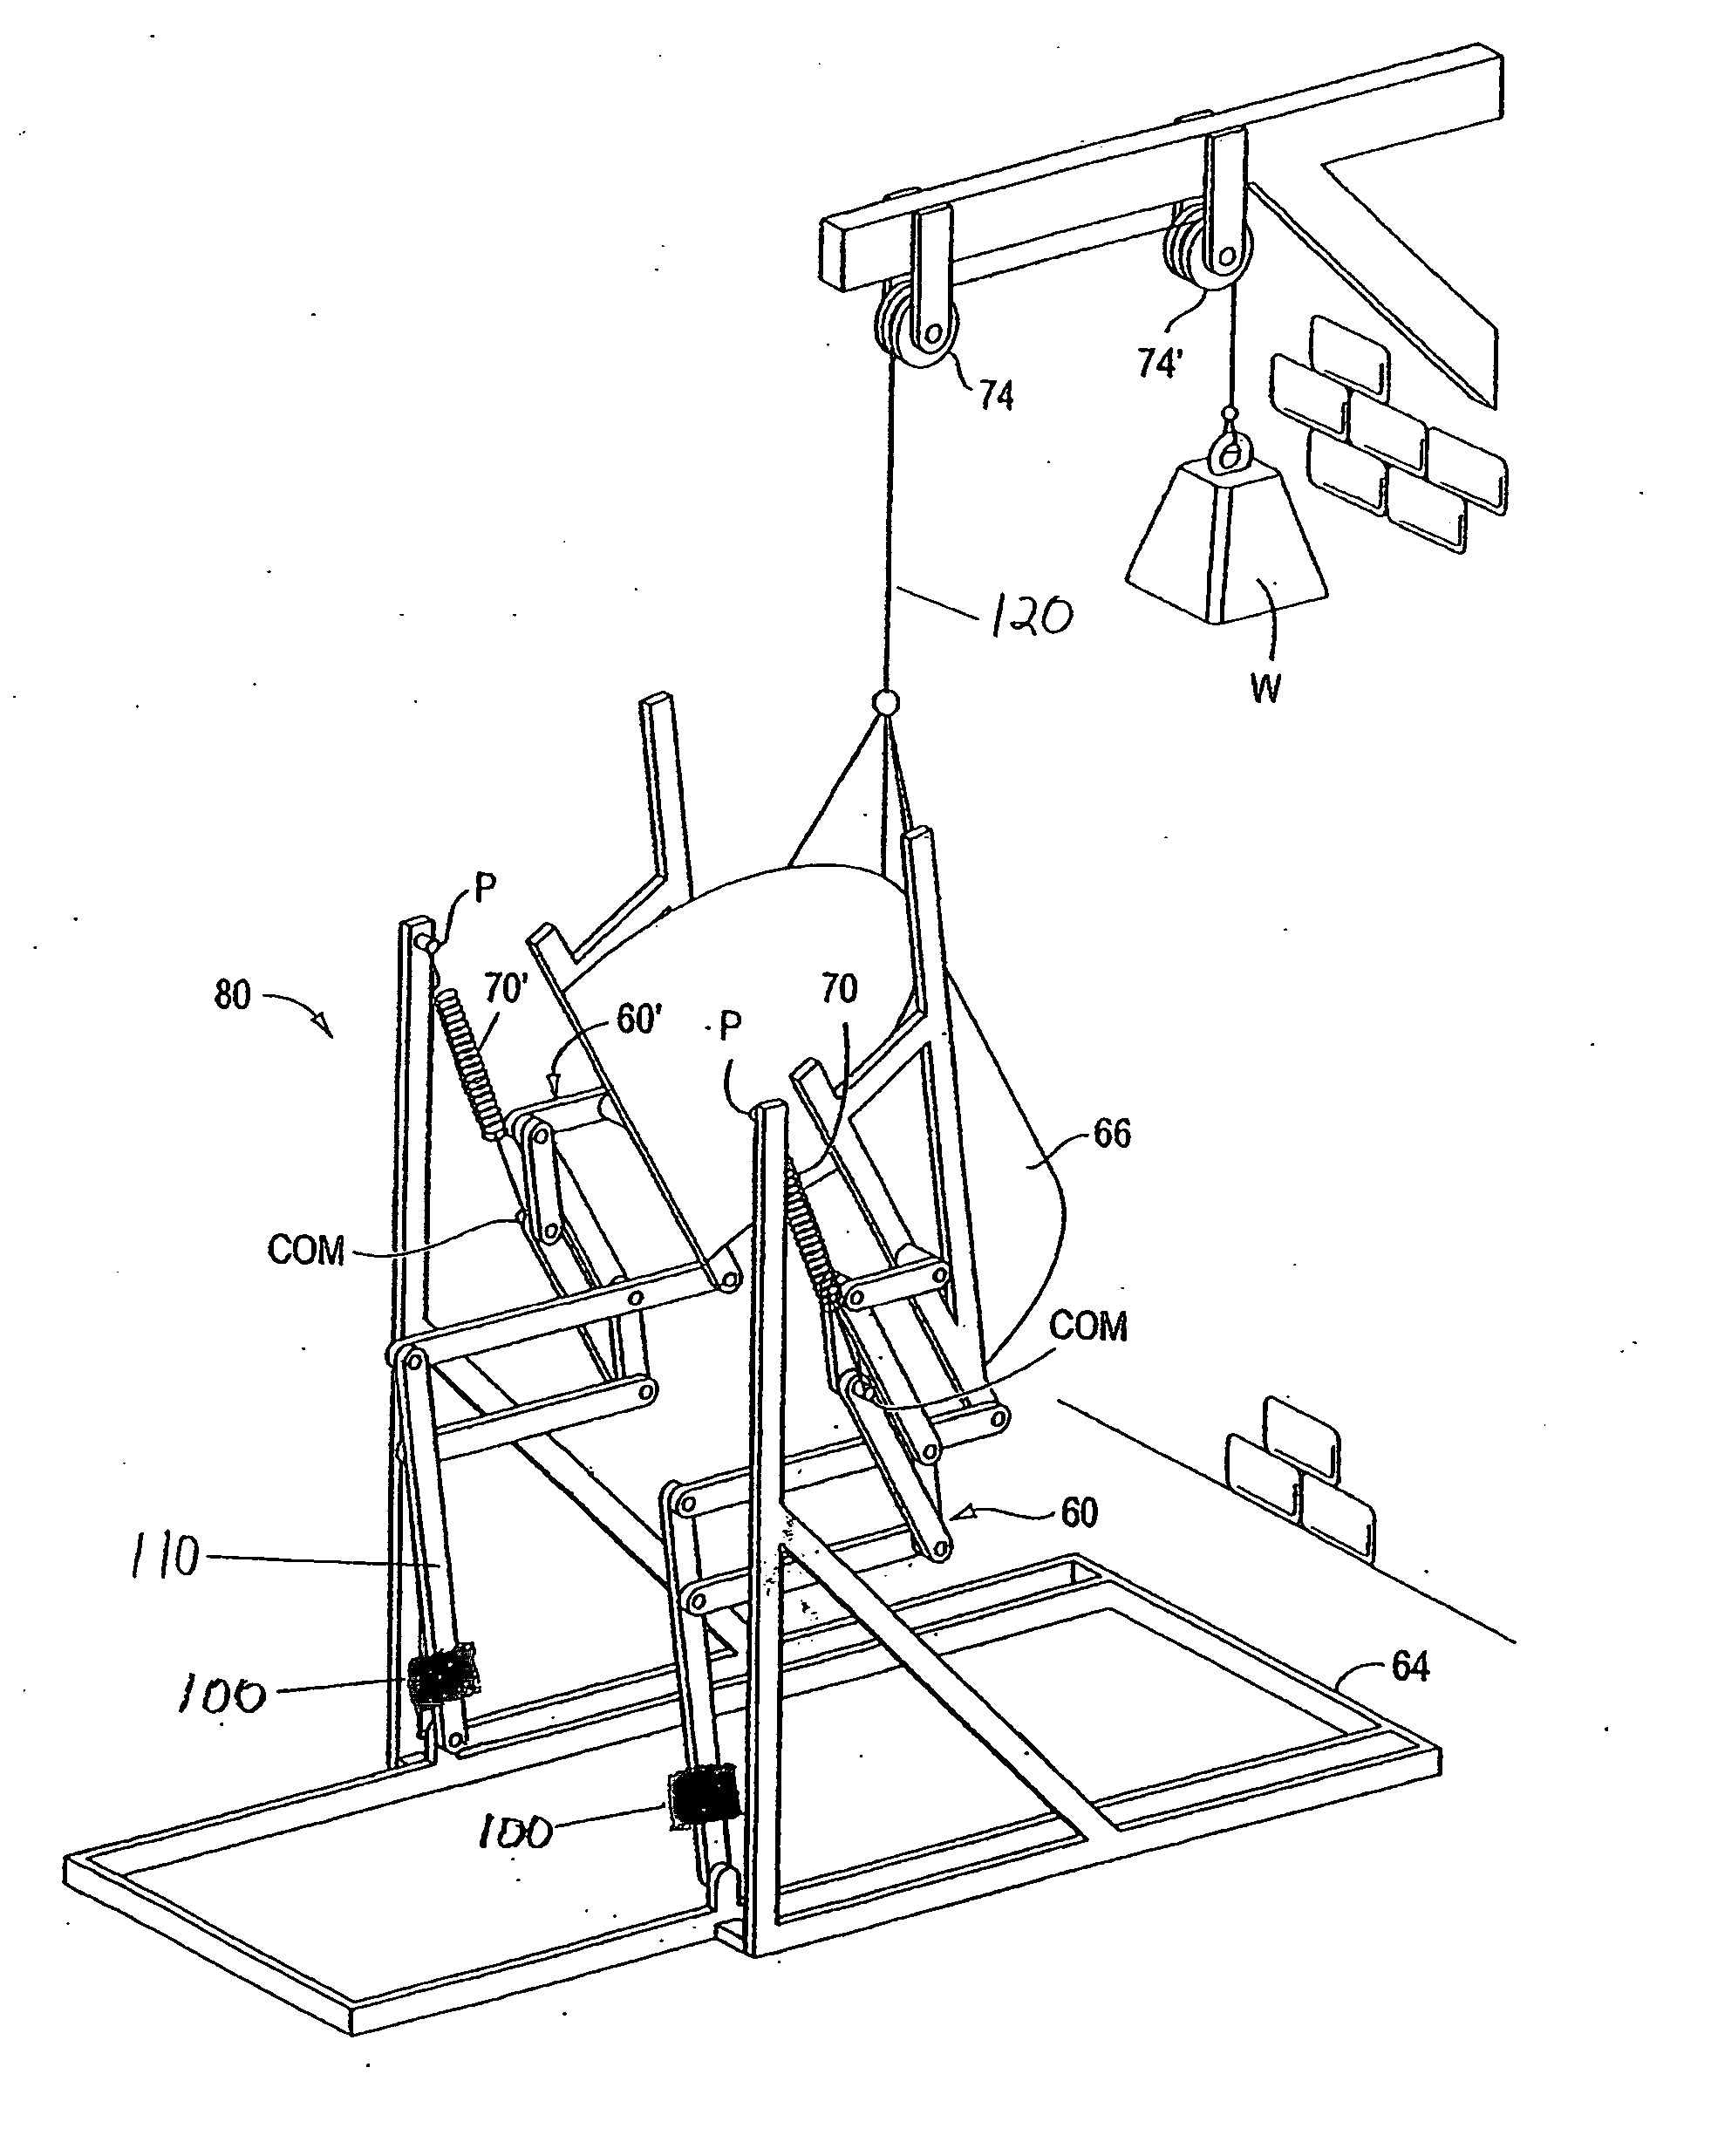 Passive gravity-balanced assistive device for sit-to-stand tasks